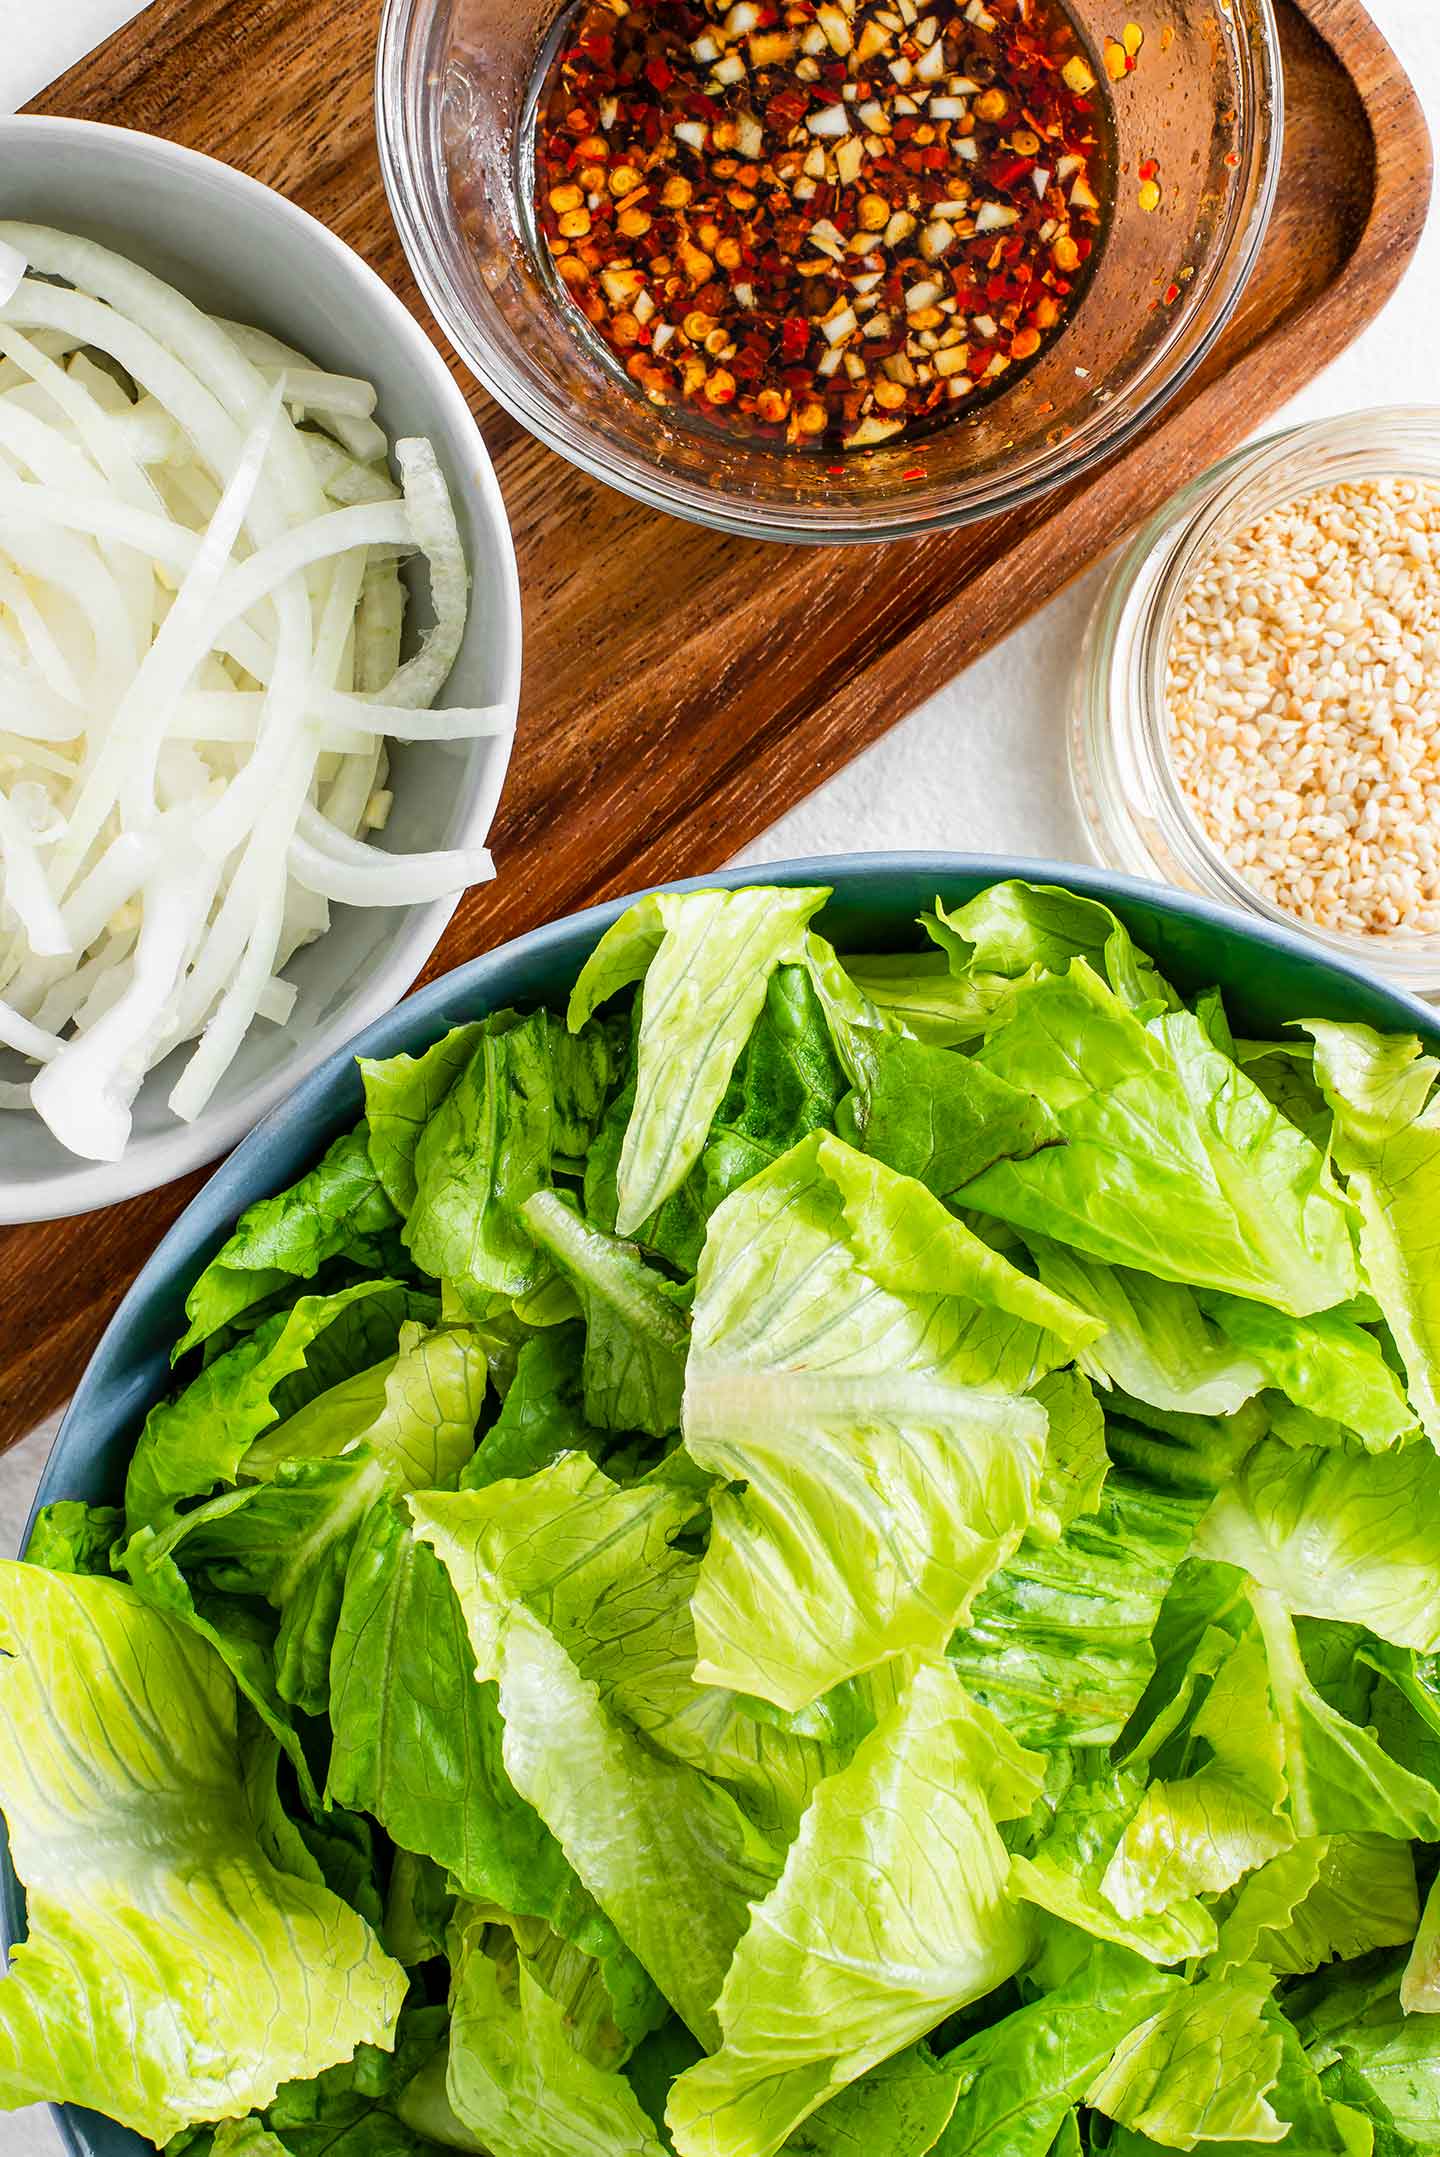 Top down view of the prepared ingredients. Torn lettuce, sliced onion, a finished dressing, and toasted sesame seeds.